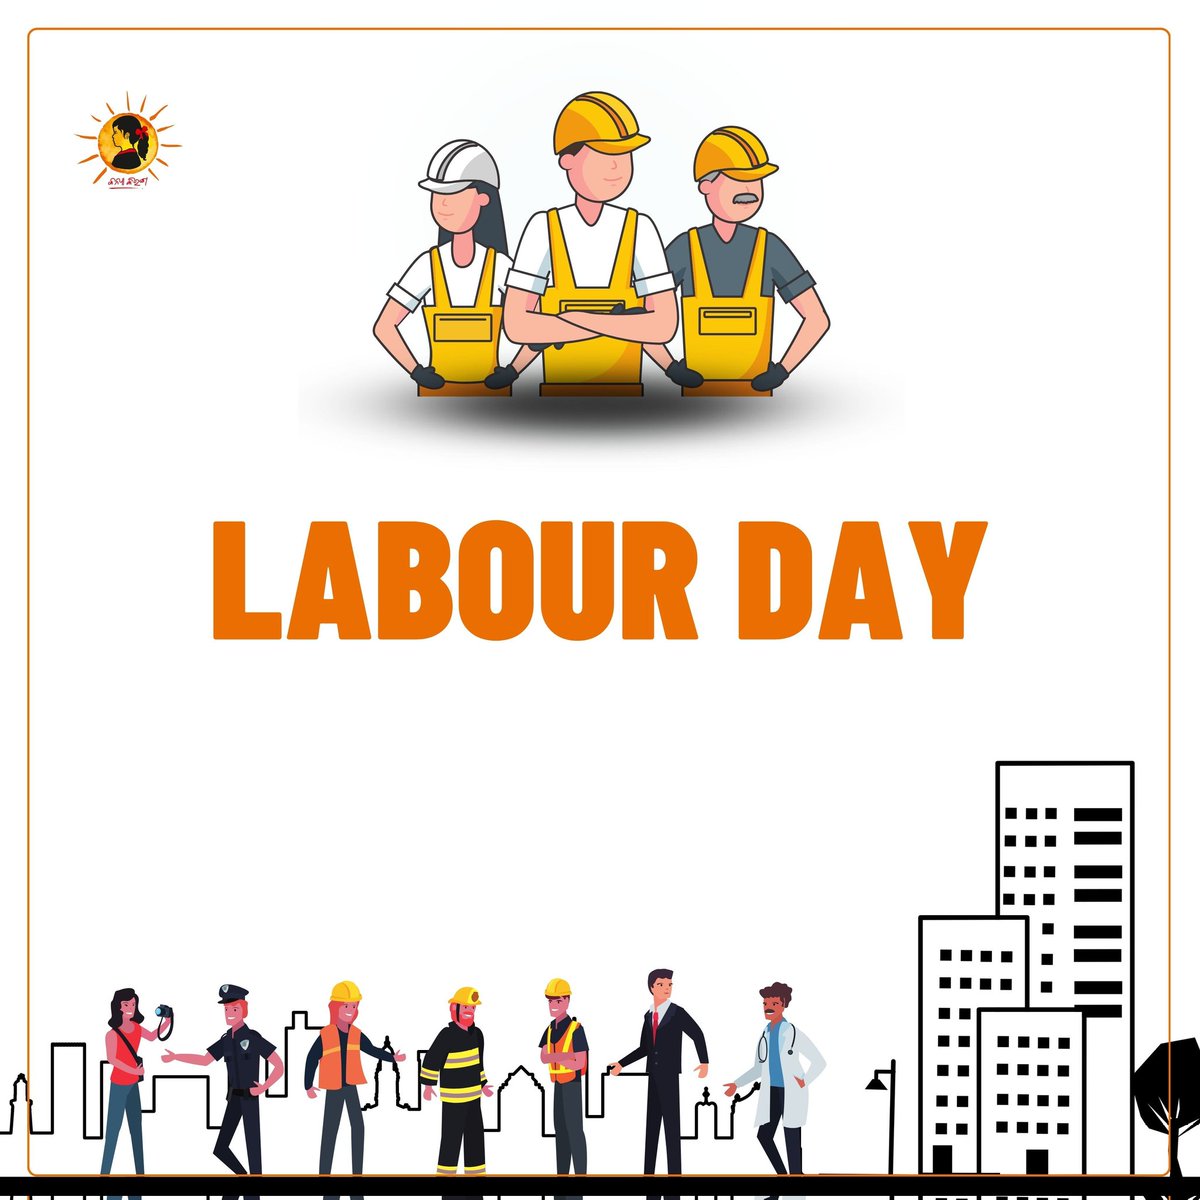 At #KanyaKiran, we recognize the importance of labour rights and fair working conditions. Let's celebrate the achievements of workers and continue to strive for a more equitable and inclusive society.
. 
. 
. 
. 
. 
. 
. 
#labourday #KanyaKiran